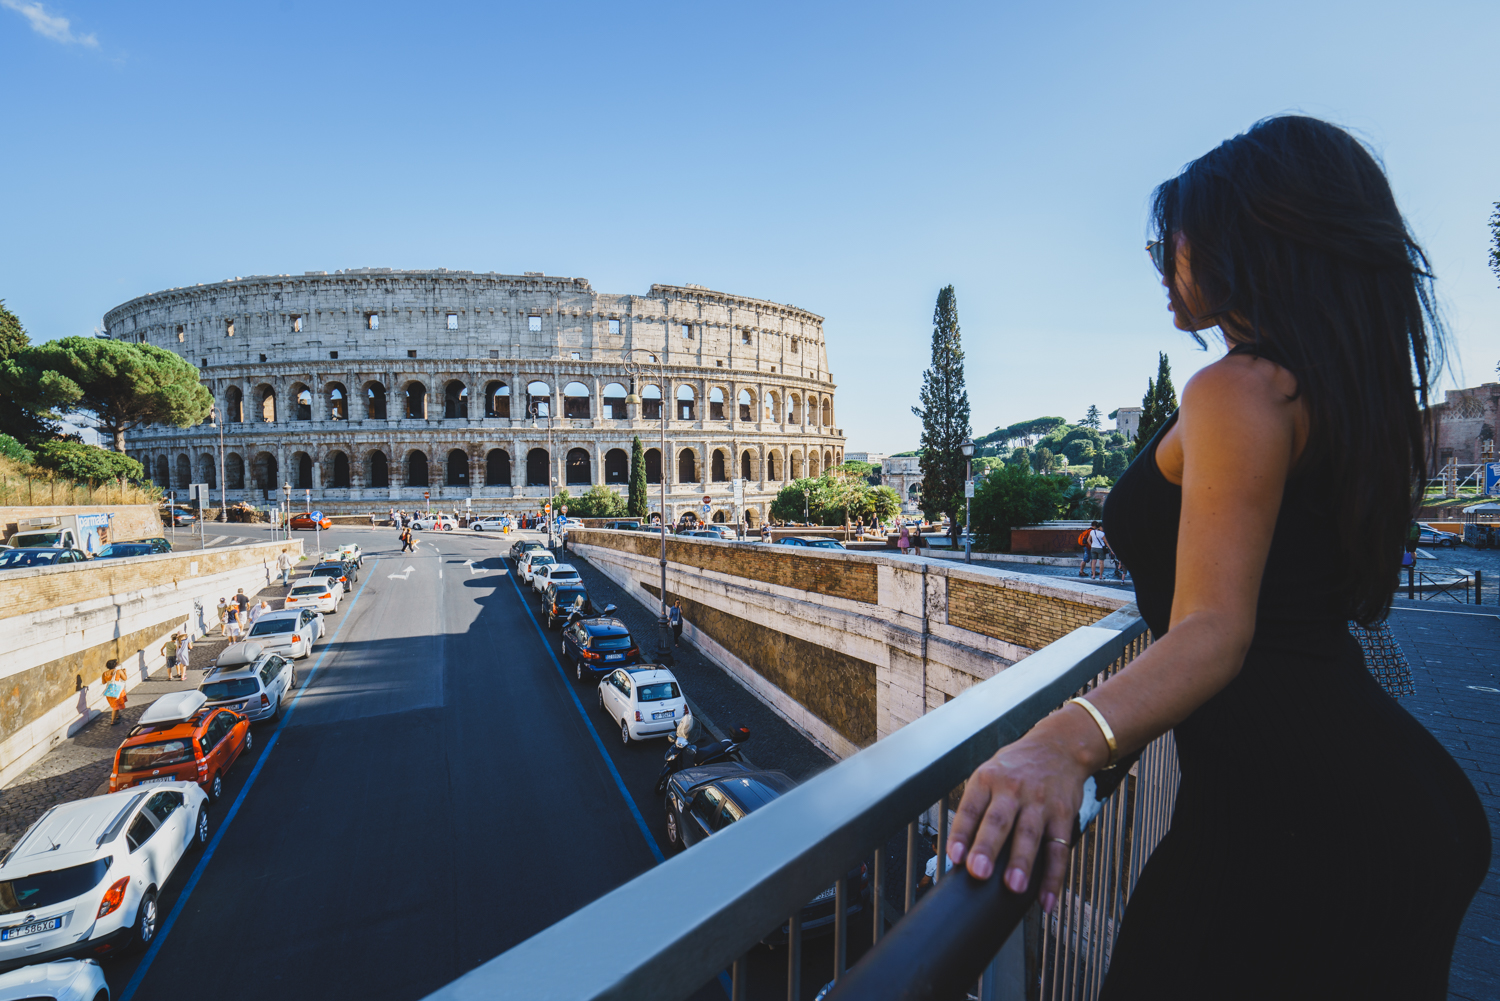 Nicole Isaacs at the Colosseum in Rome, Italy. (Photo by Jeff Lombardo)